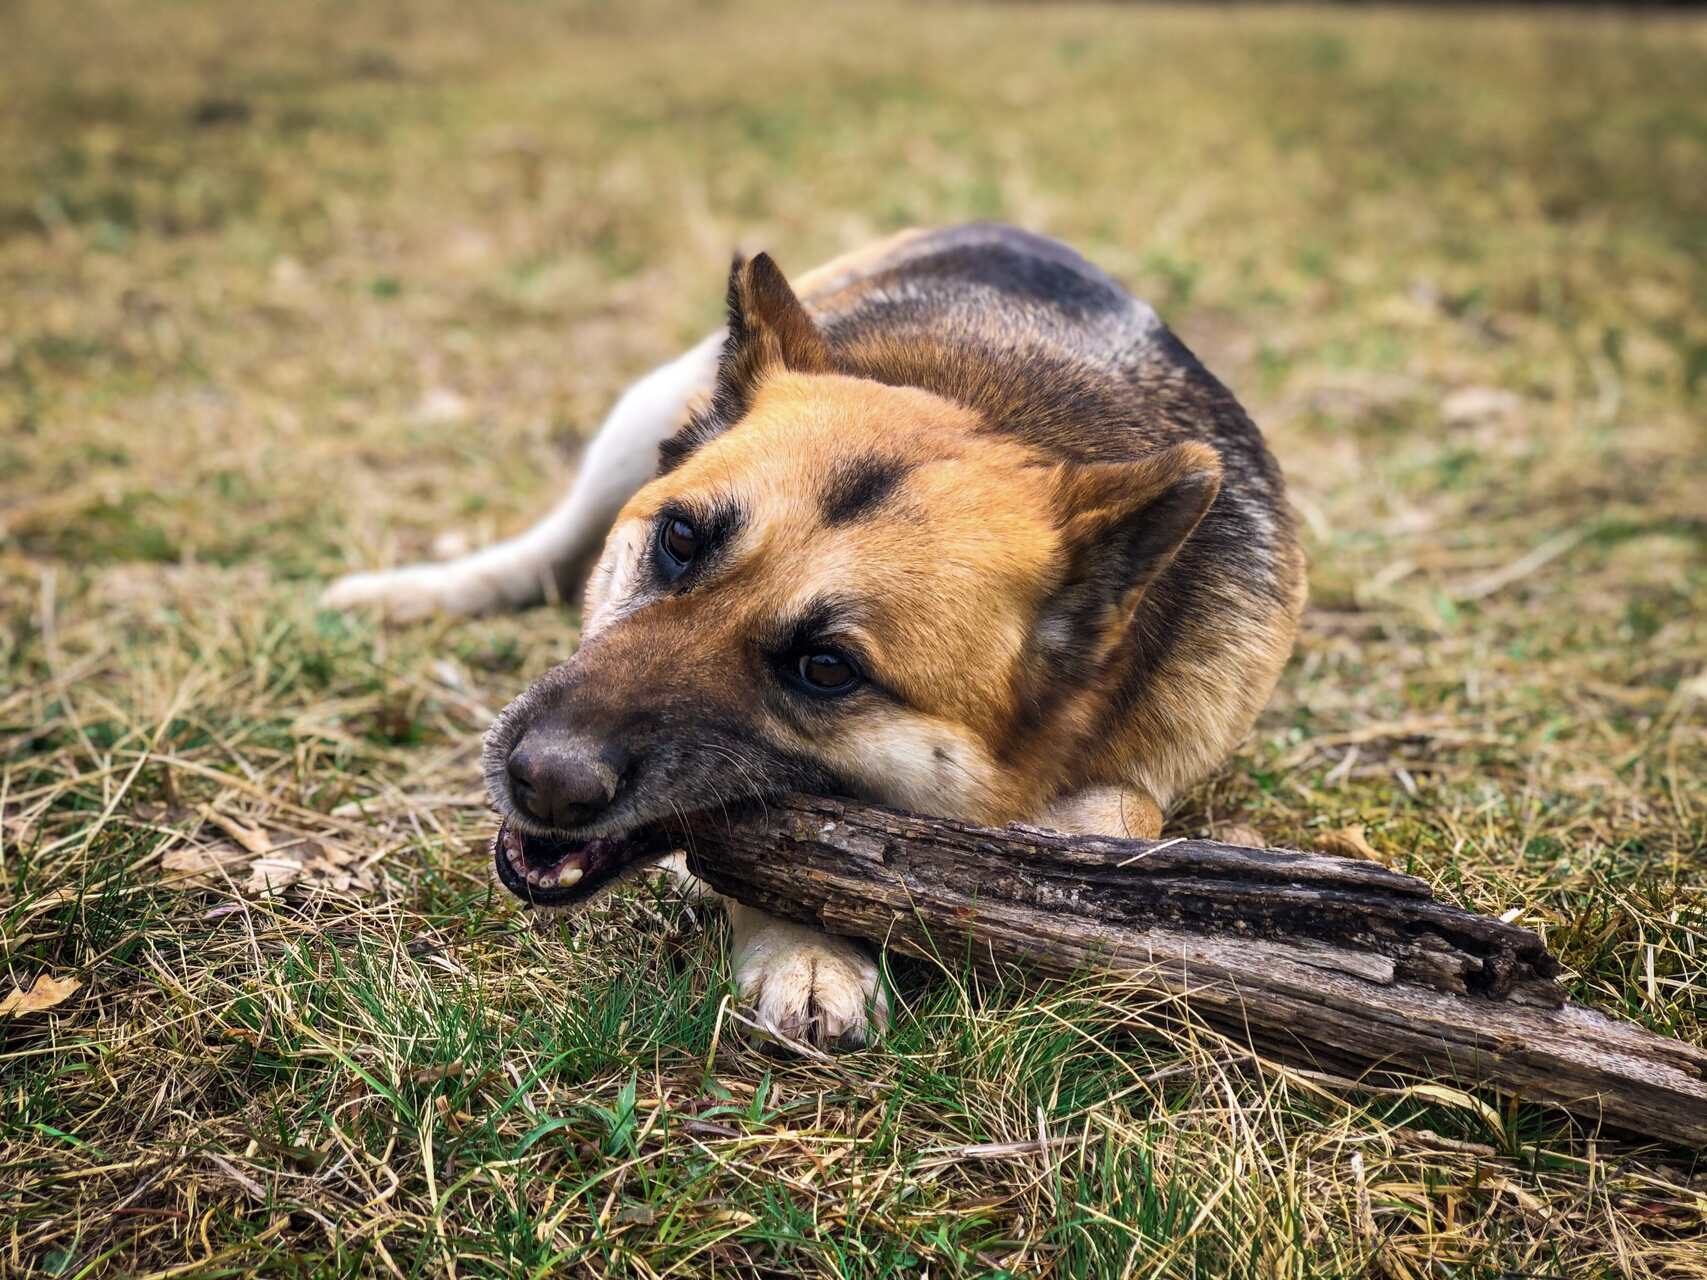 A dog chewing on a stick outdoors